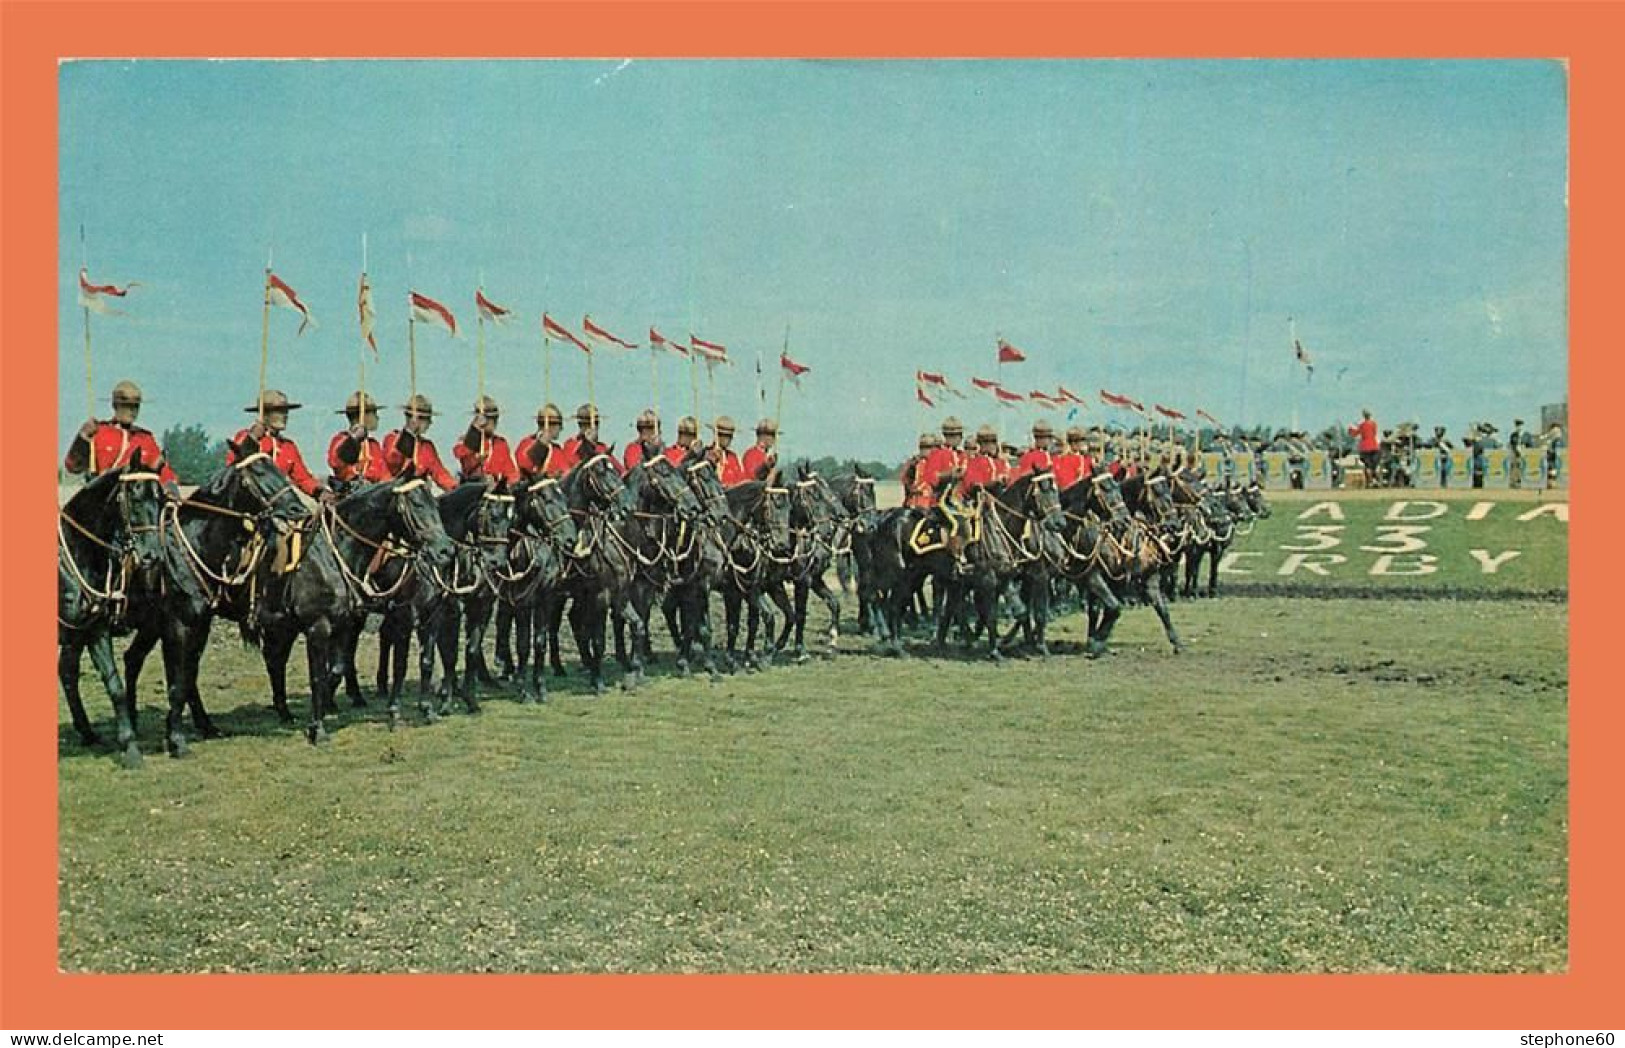 A705 / 561 Royal Canadian Mounted Police - Modern Cards